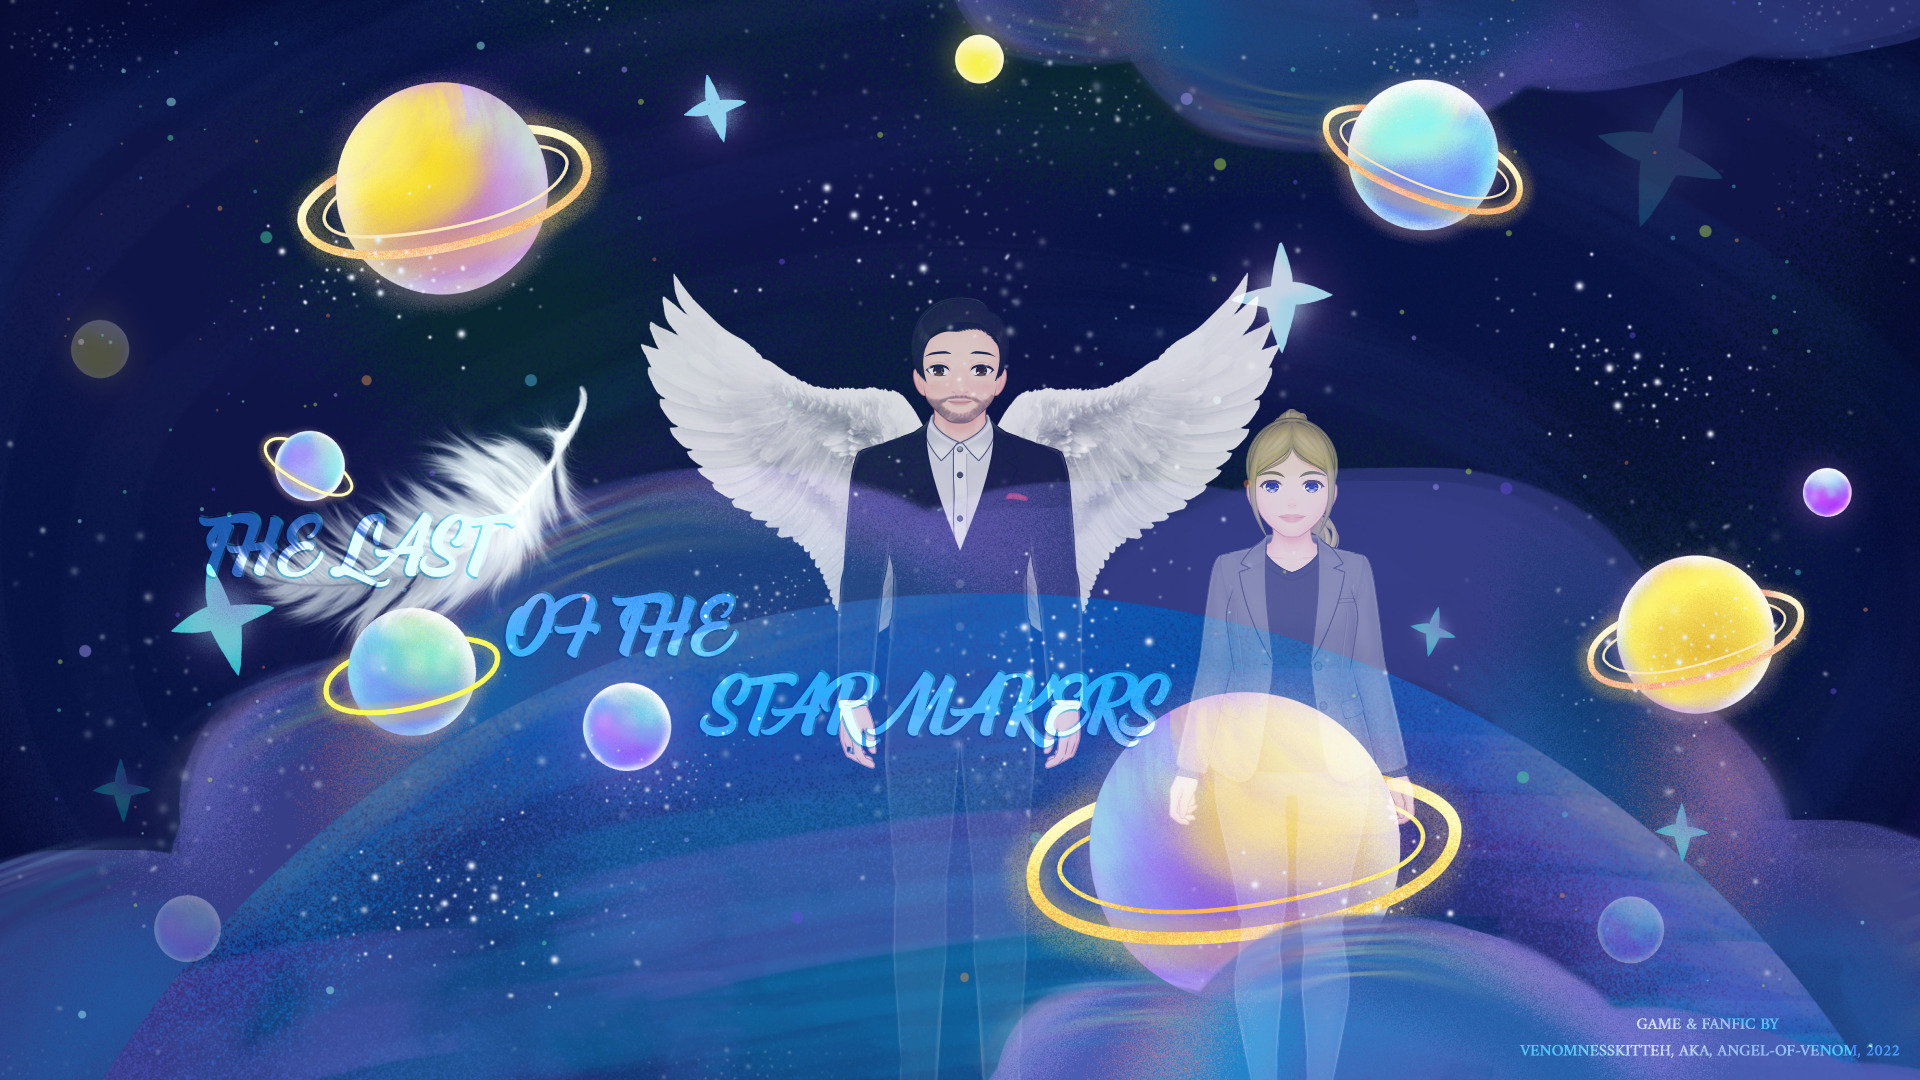 The Last of the star makers [DEMO]